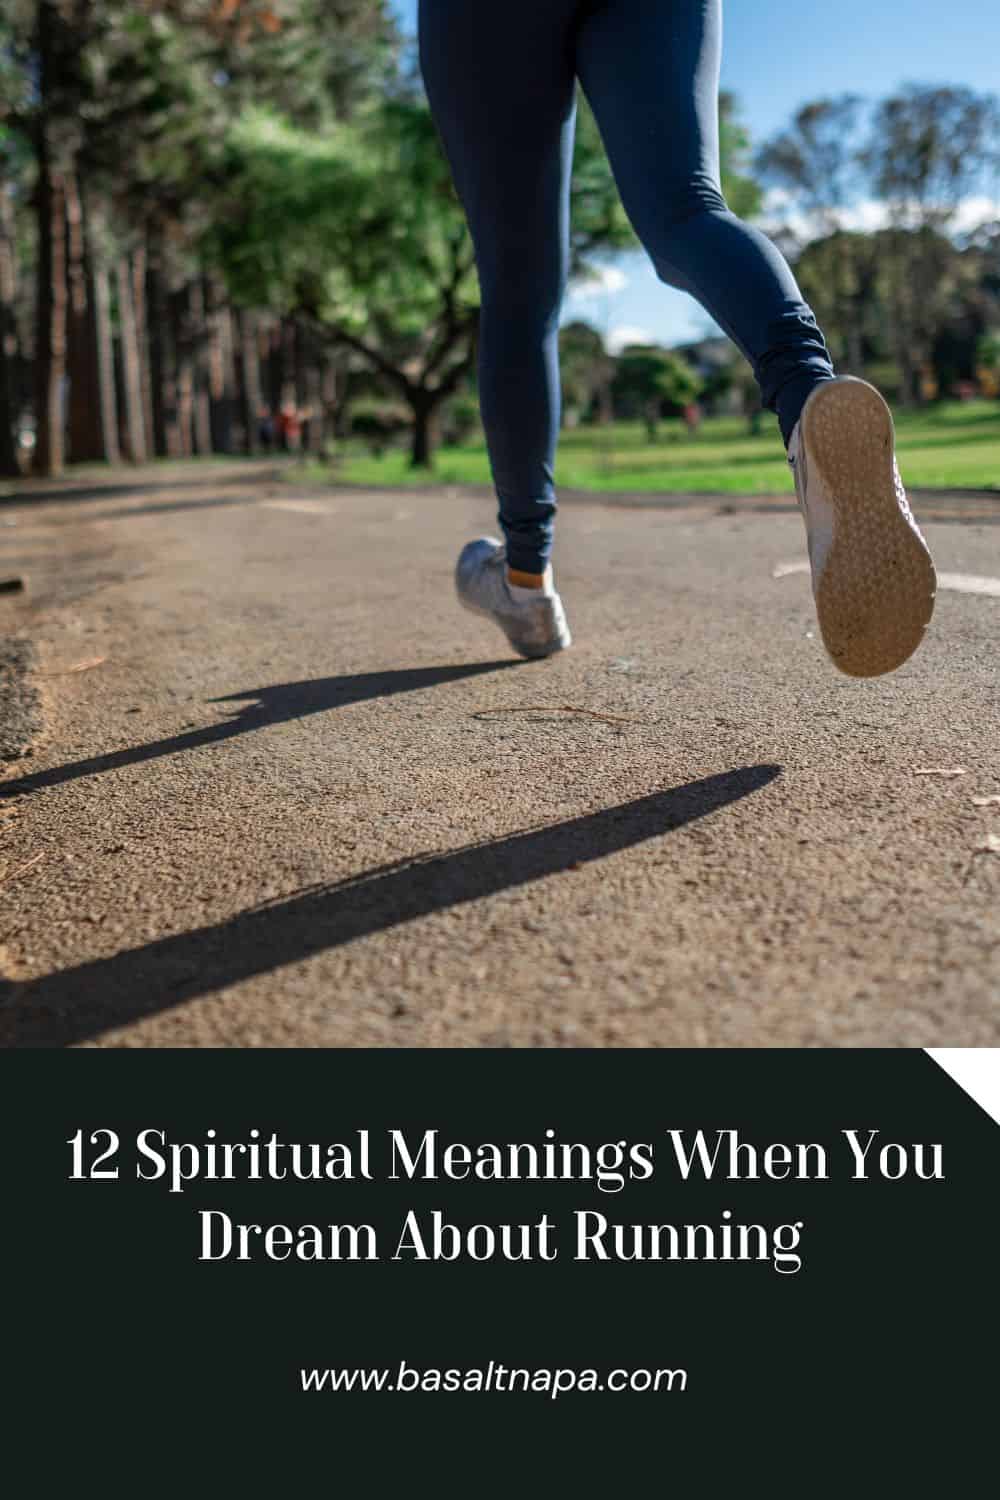 12 Spiritual Meanings When You Dream About Running